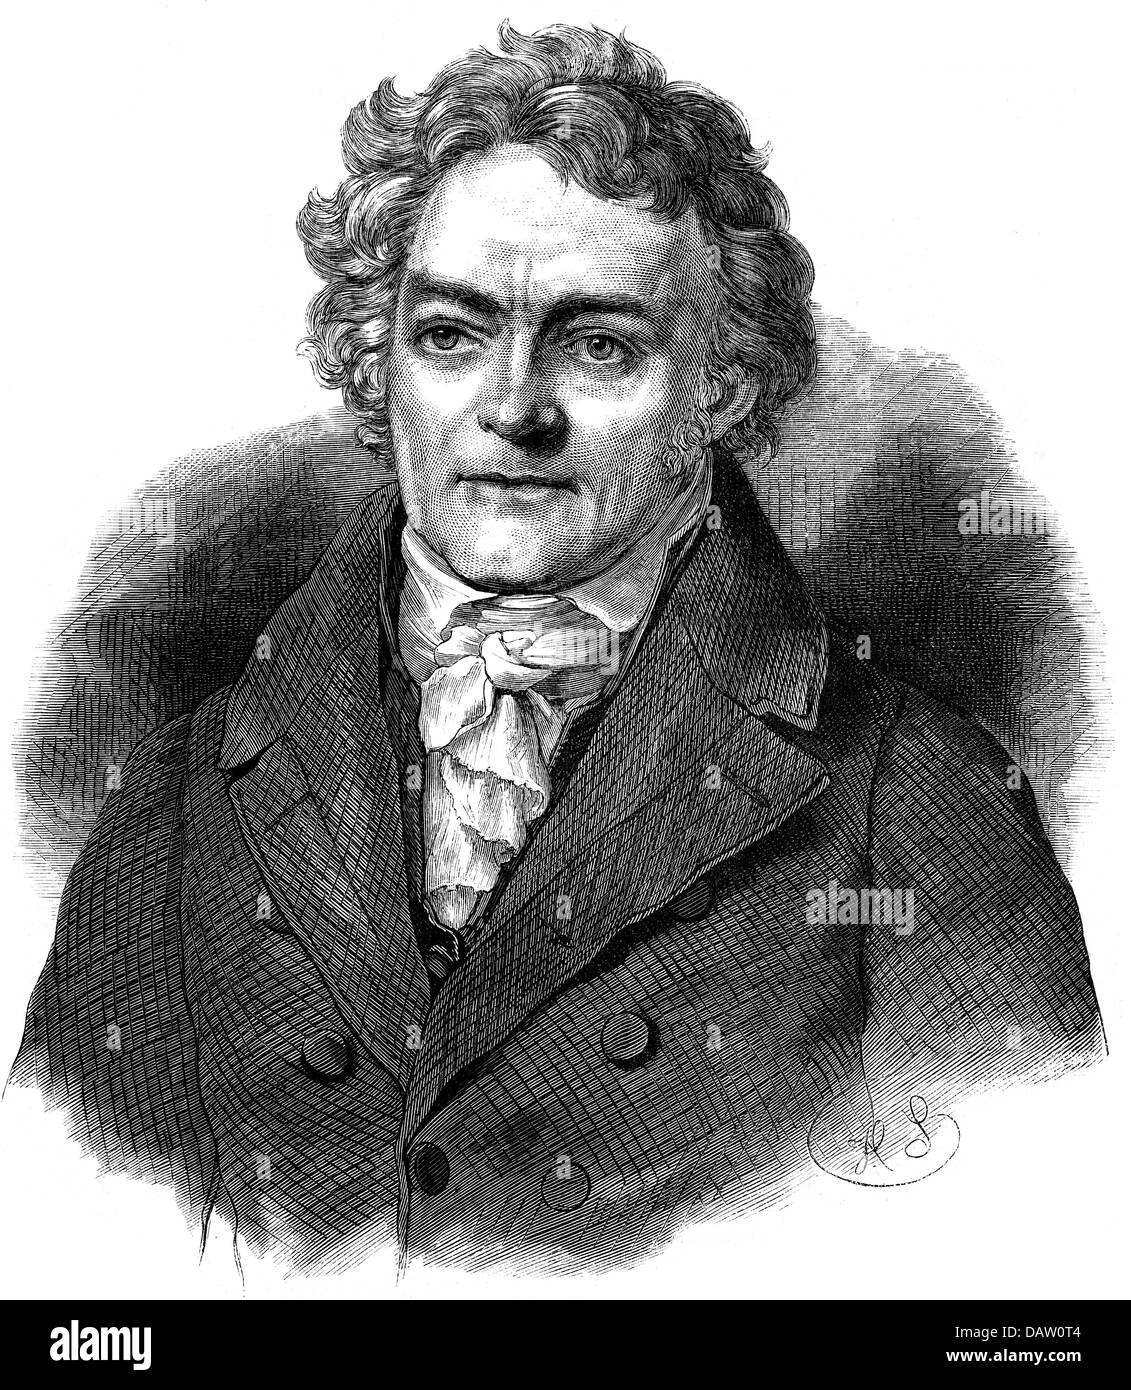 Senefelder, Alois, 6.11.1771 - 26.2.1834, inventor of the lithograph, portrait, based on lithograph by himself, wood engraving, 19th century, Stock Photo